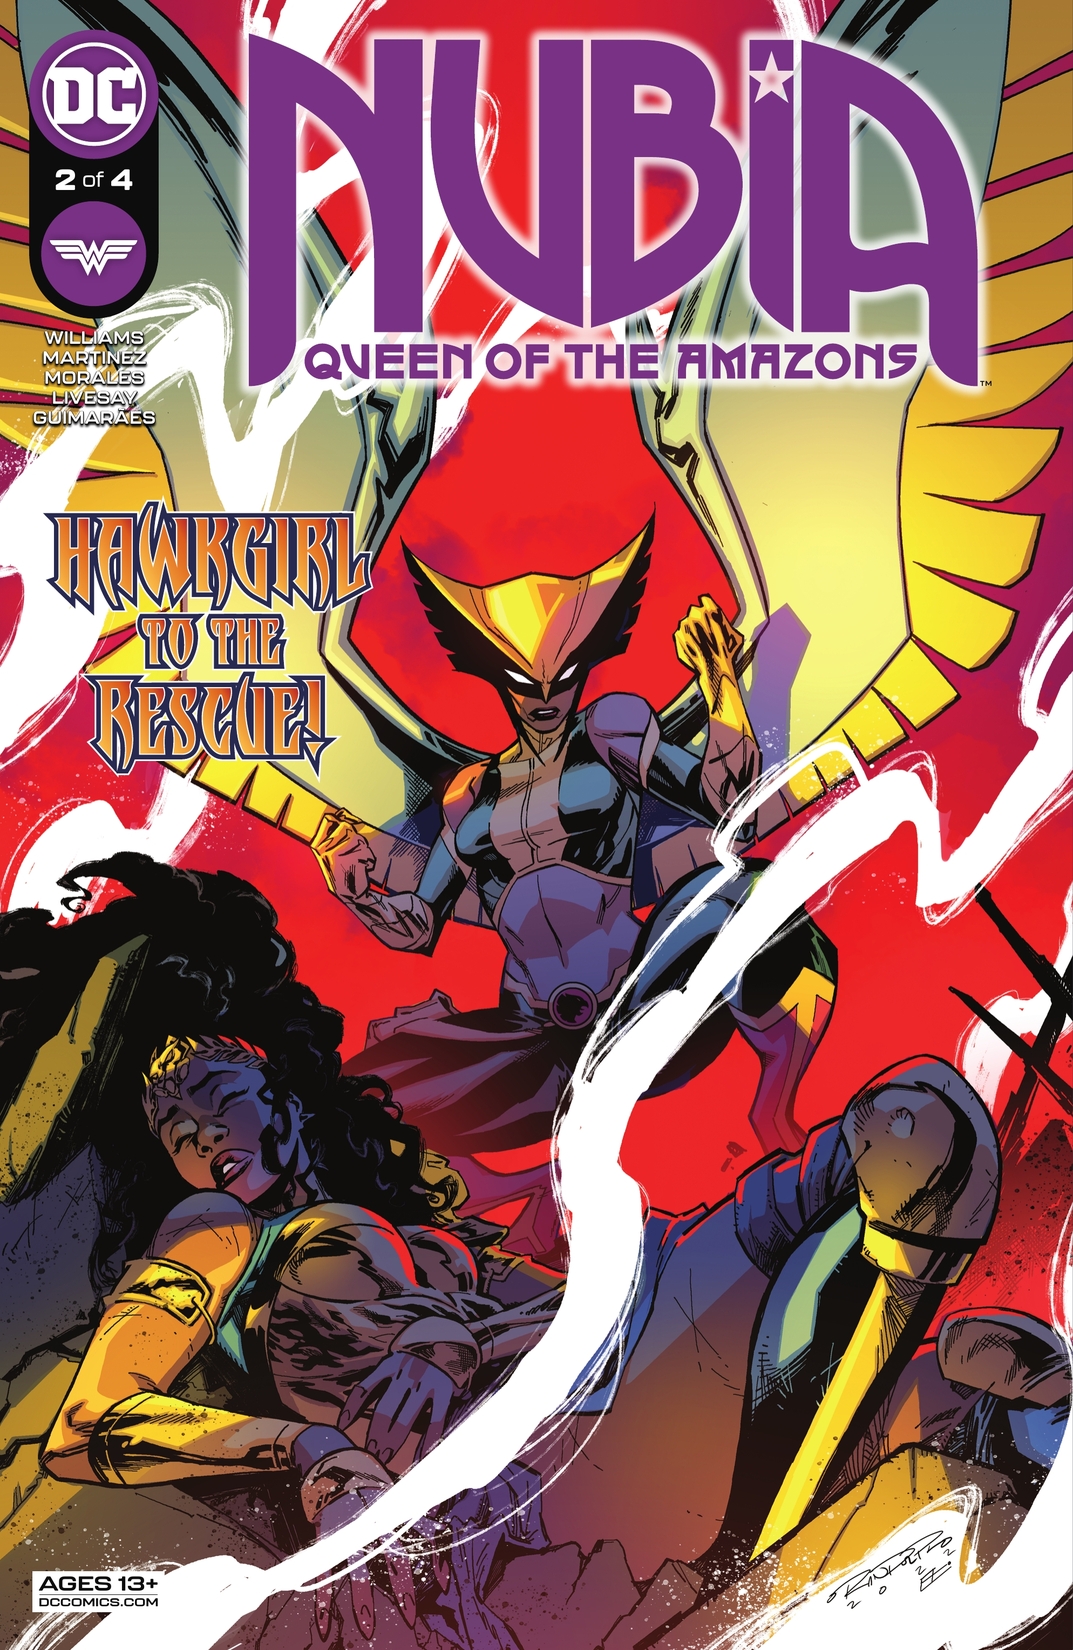 Nubia: Queen of the Amazons #2 preview images